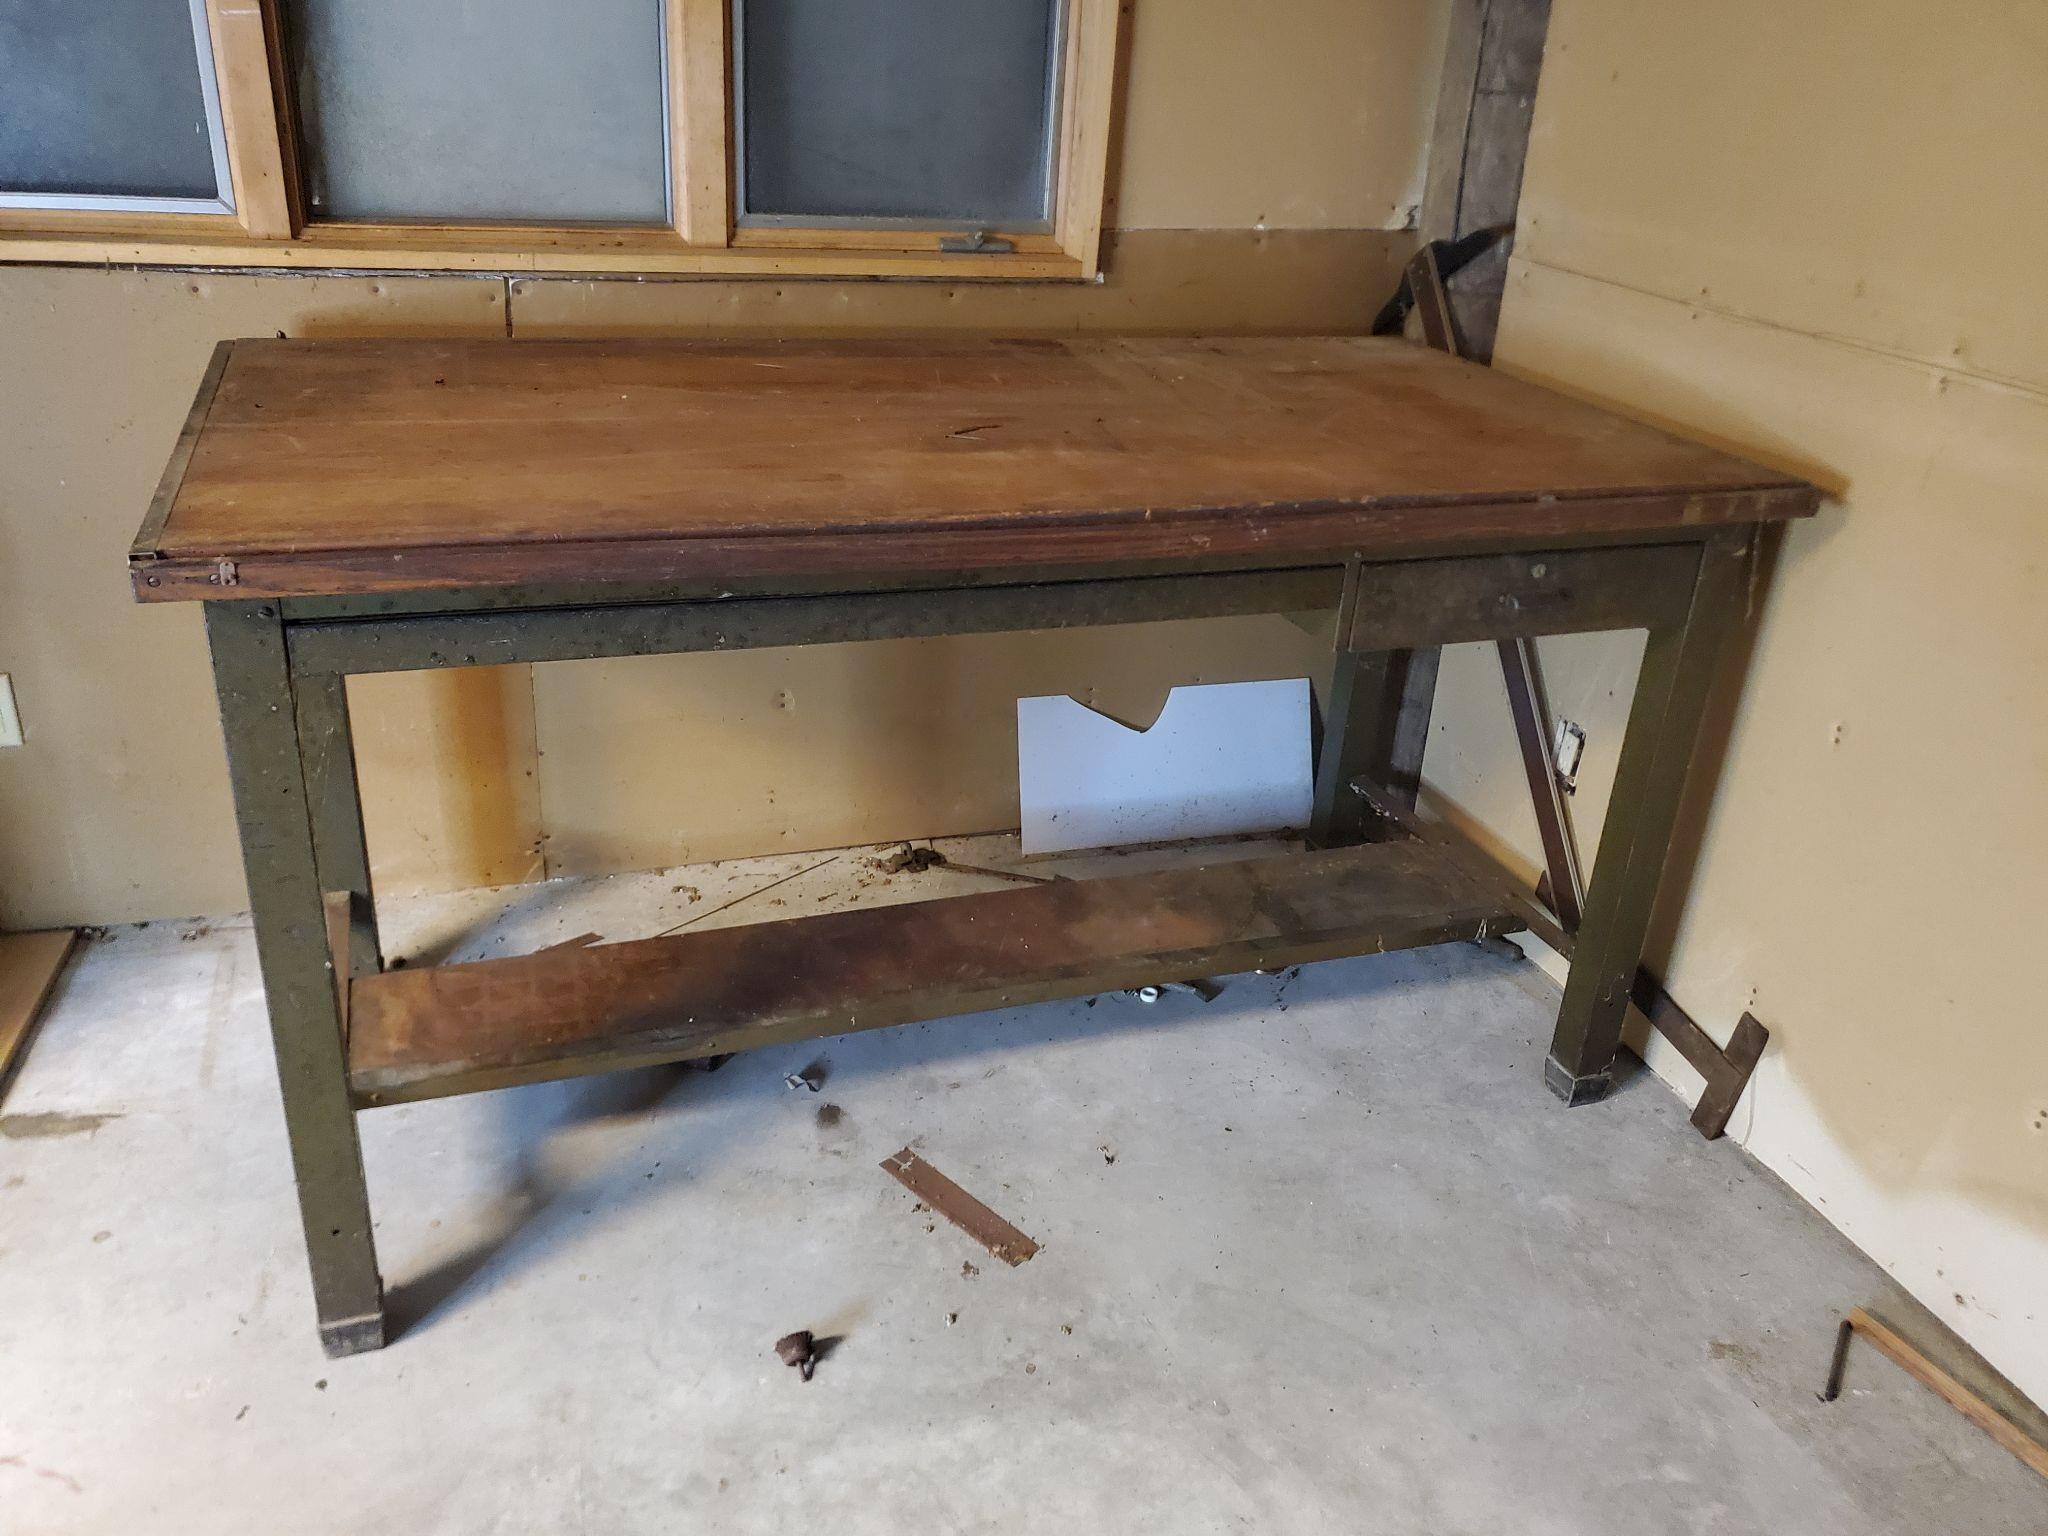 Work table work bench